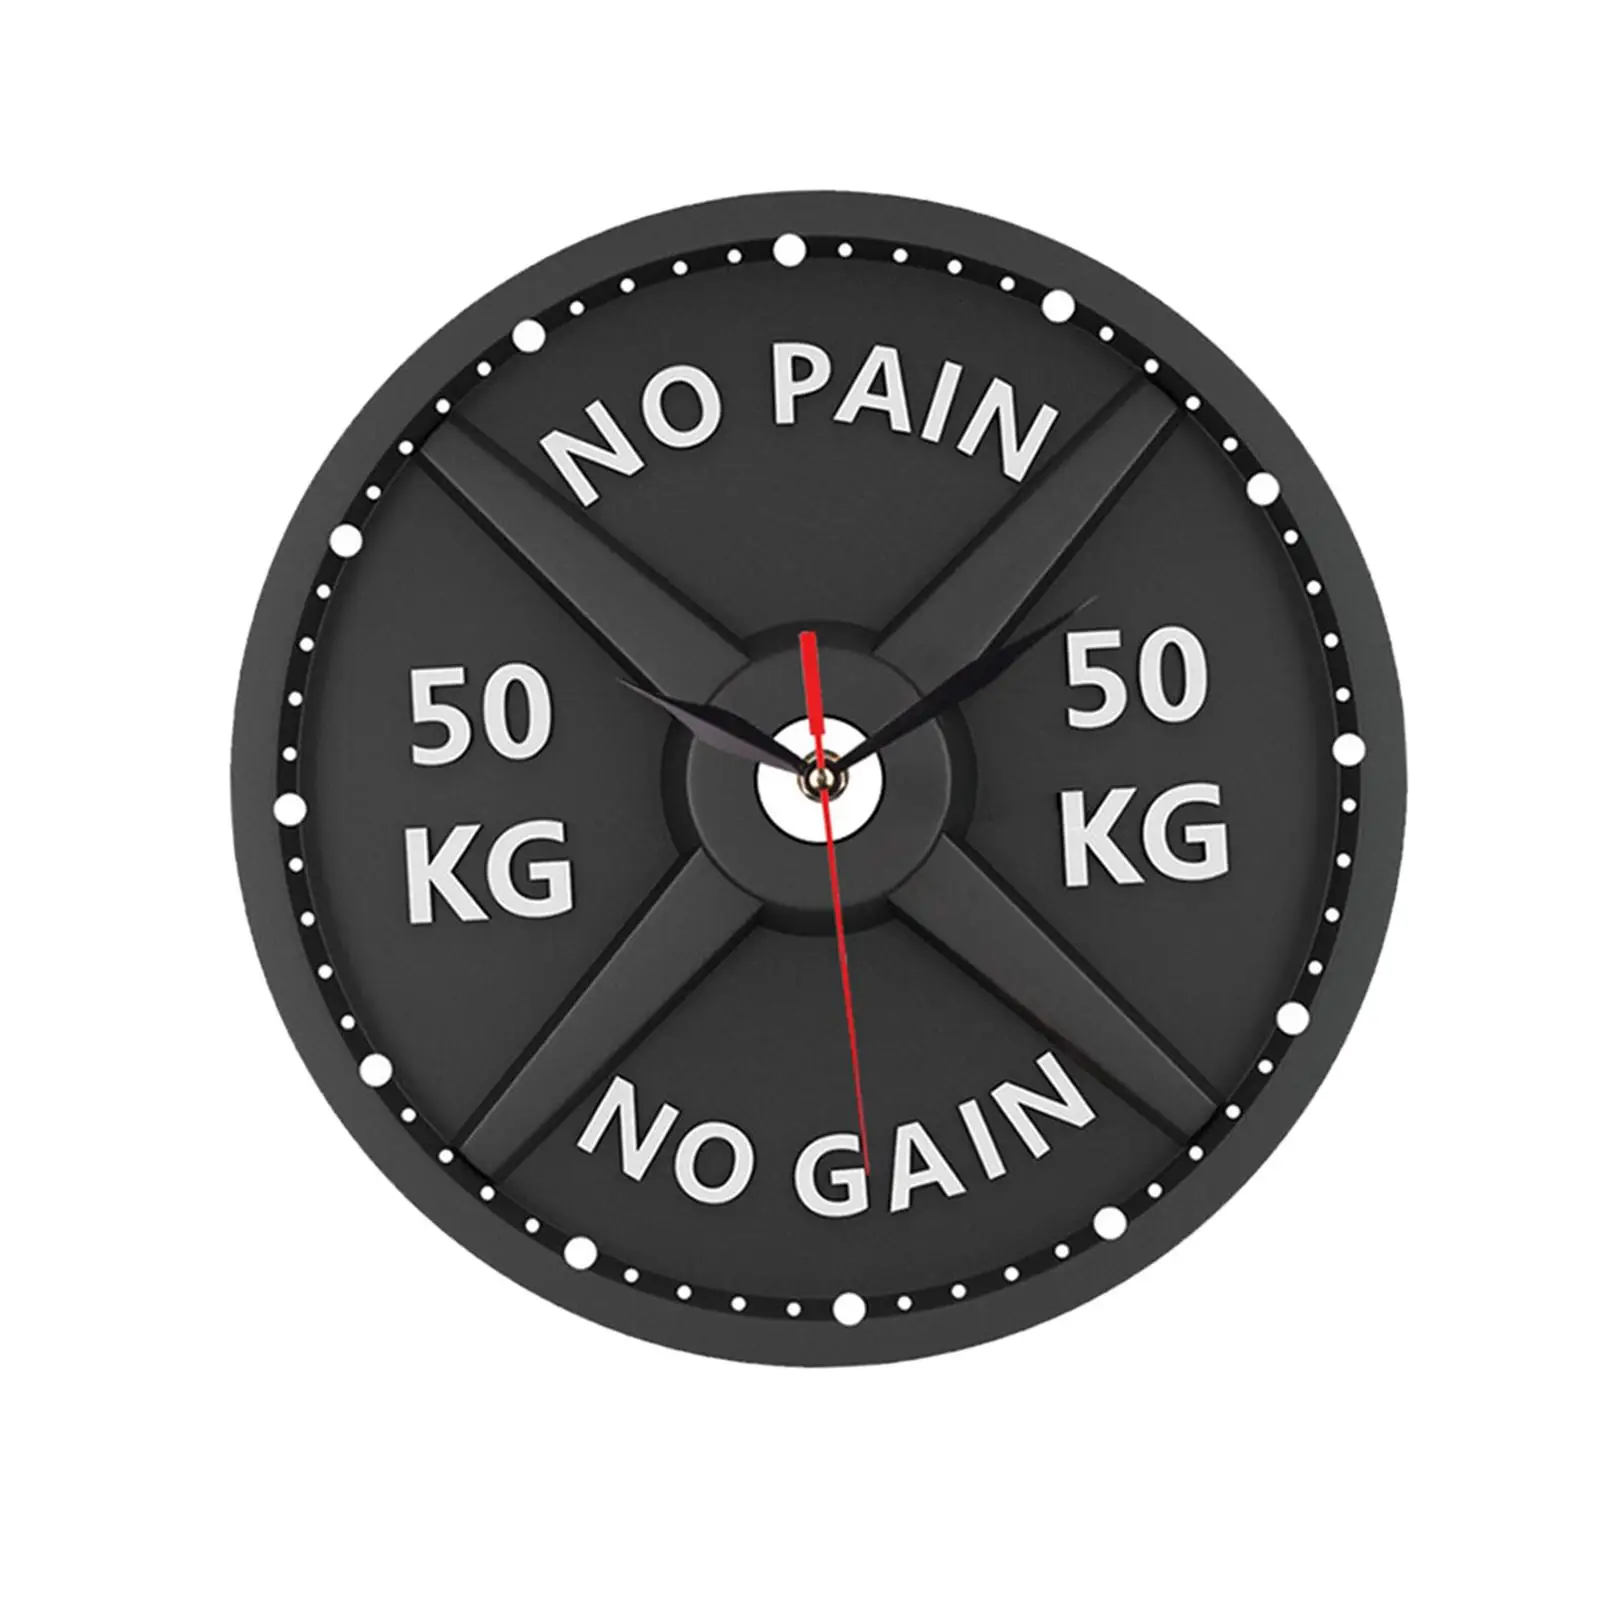 Barbell Wall Clock Silent Decorative Clock for Home Gym Fitness Bodybuilding